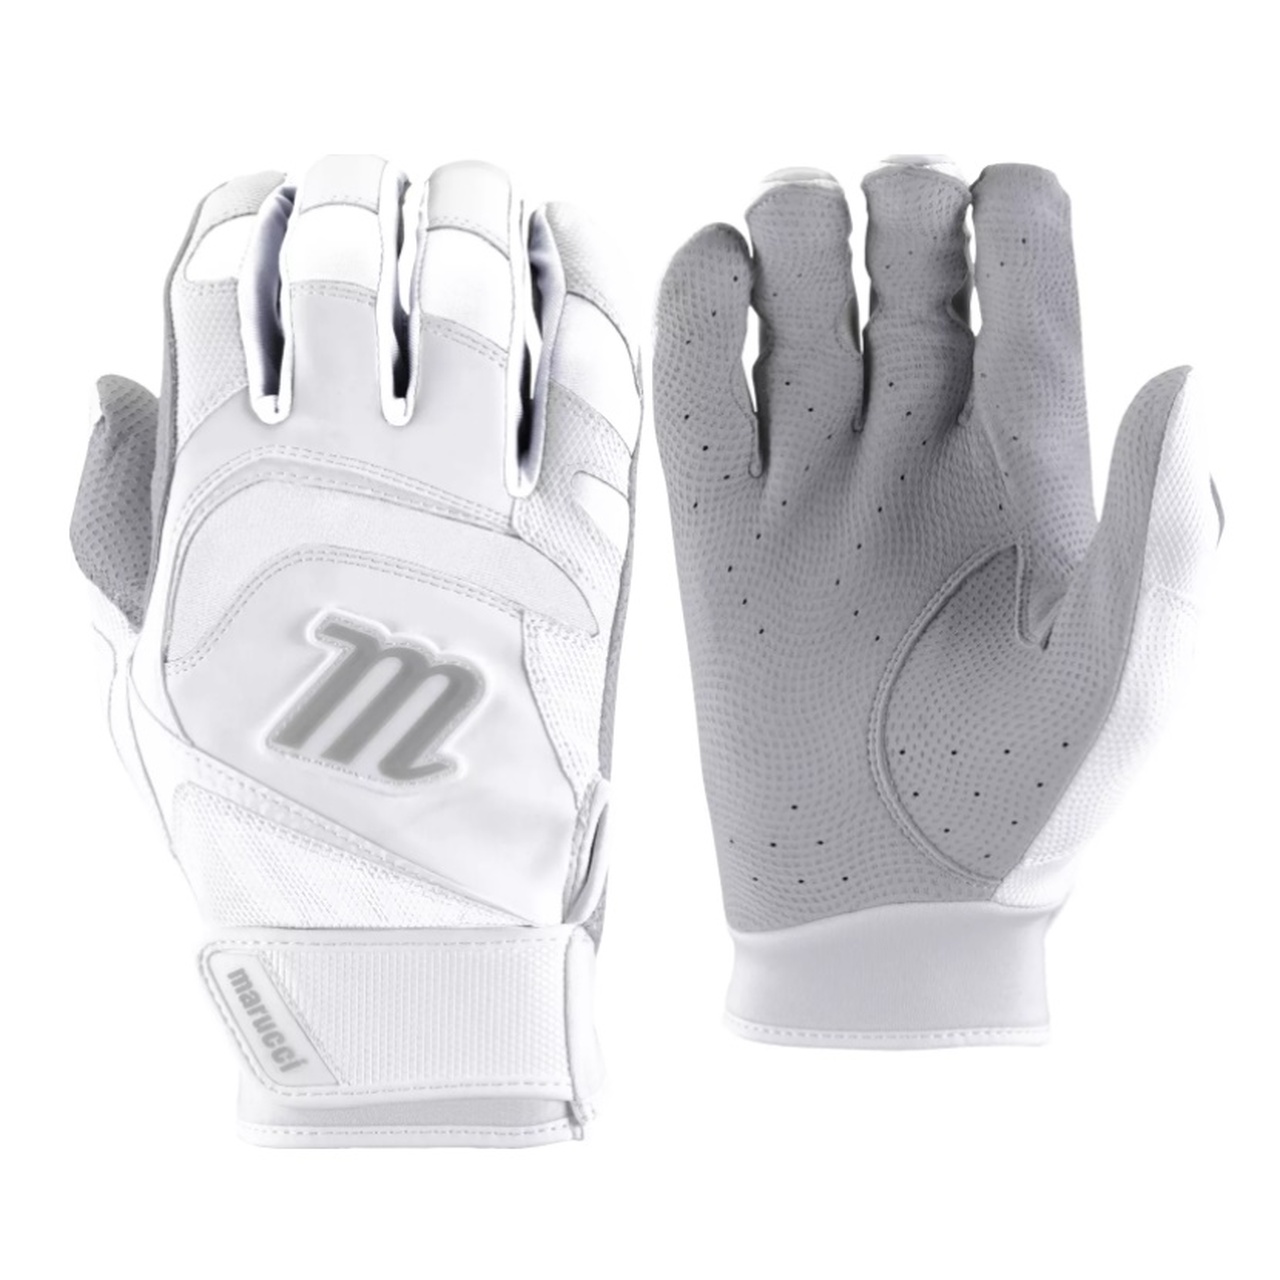 marucci-2021-signature-batting-glove-white-white-adult-x-large MBGSGN3-WW-AXL Marucci   Digitally embossed perforated cabretta sheepskin palm provides maximum grip and